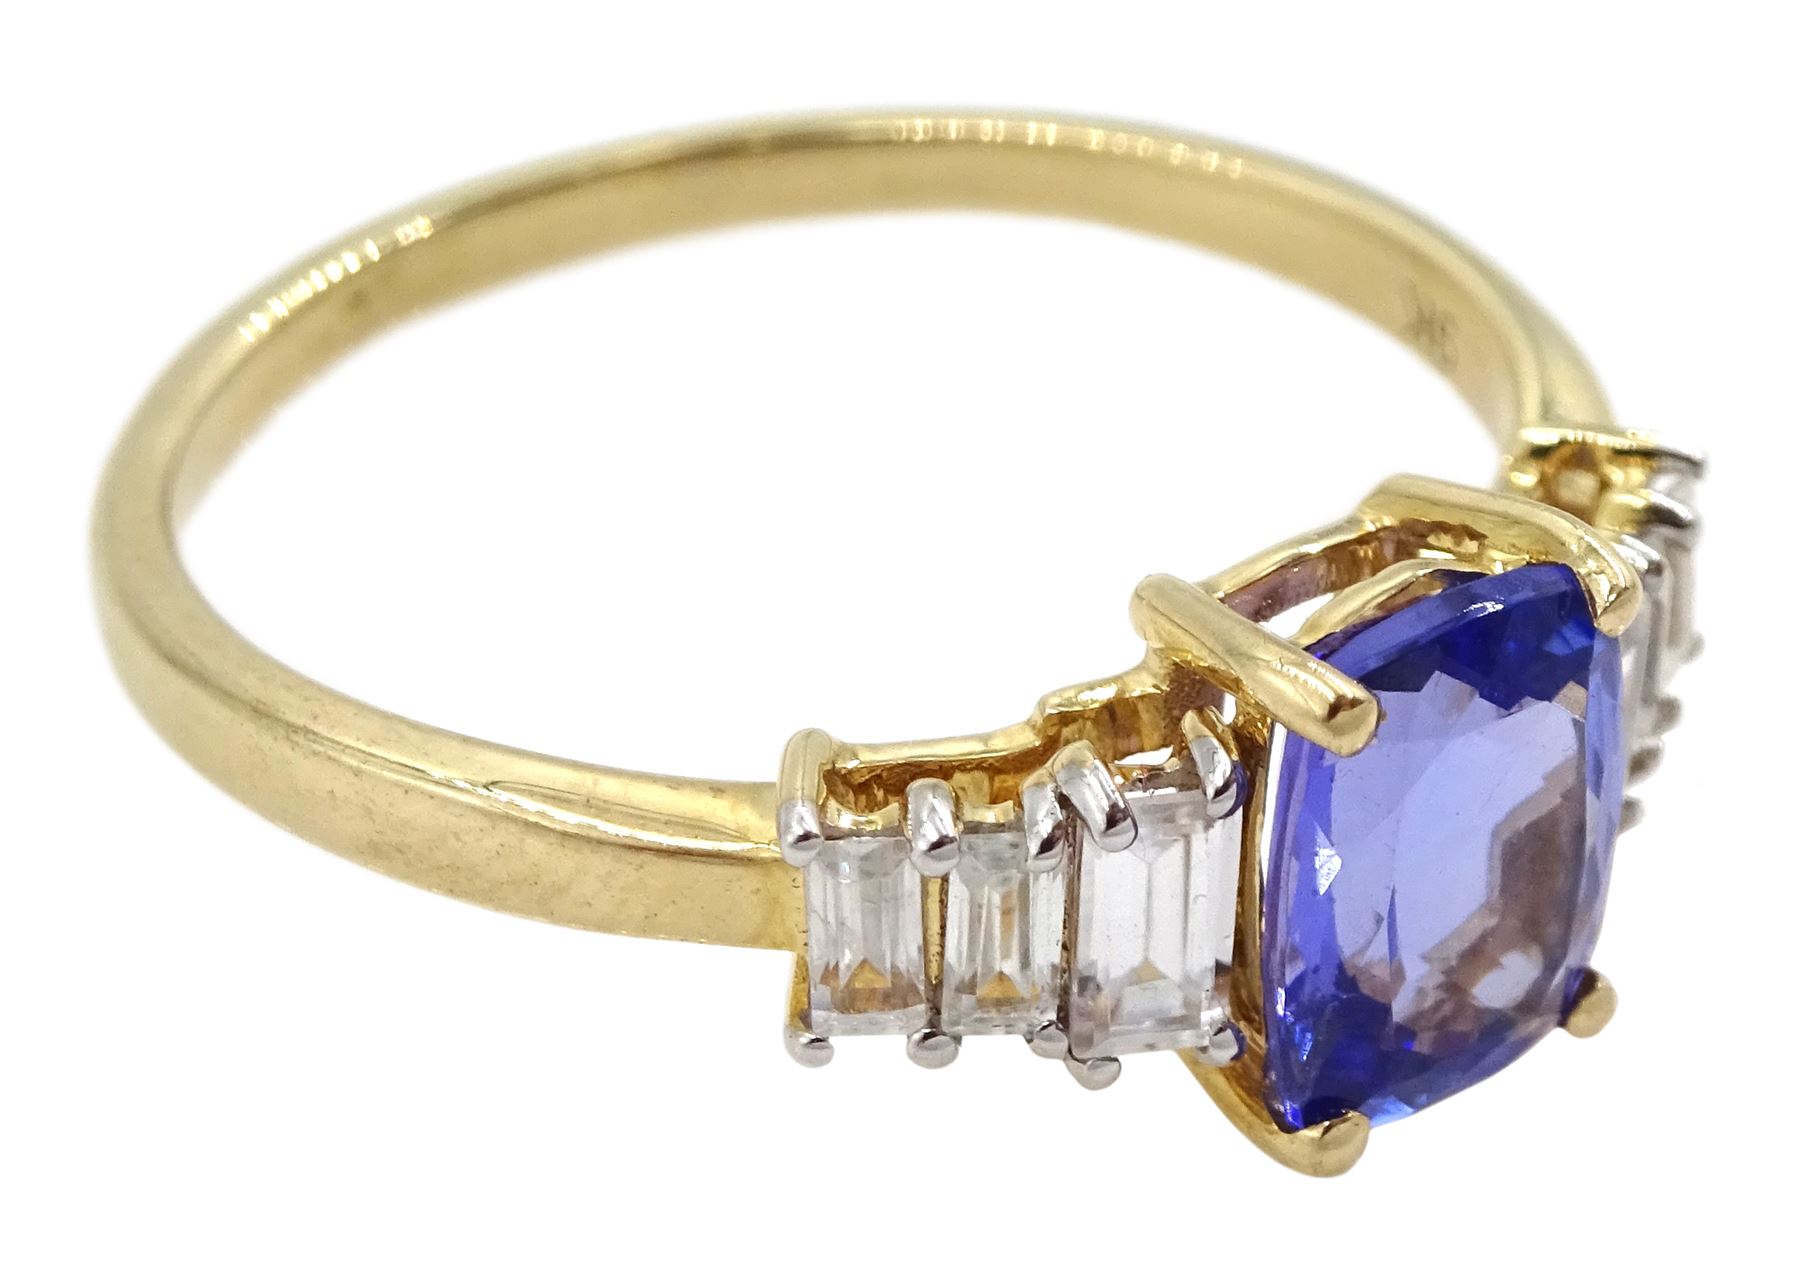 9ct gold cushion cut tanzanite and baguette cut white zircon ring - Image 3 of 4